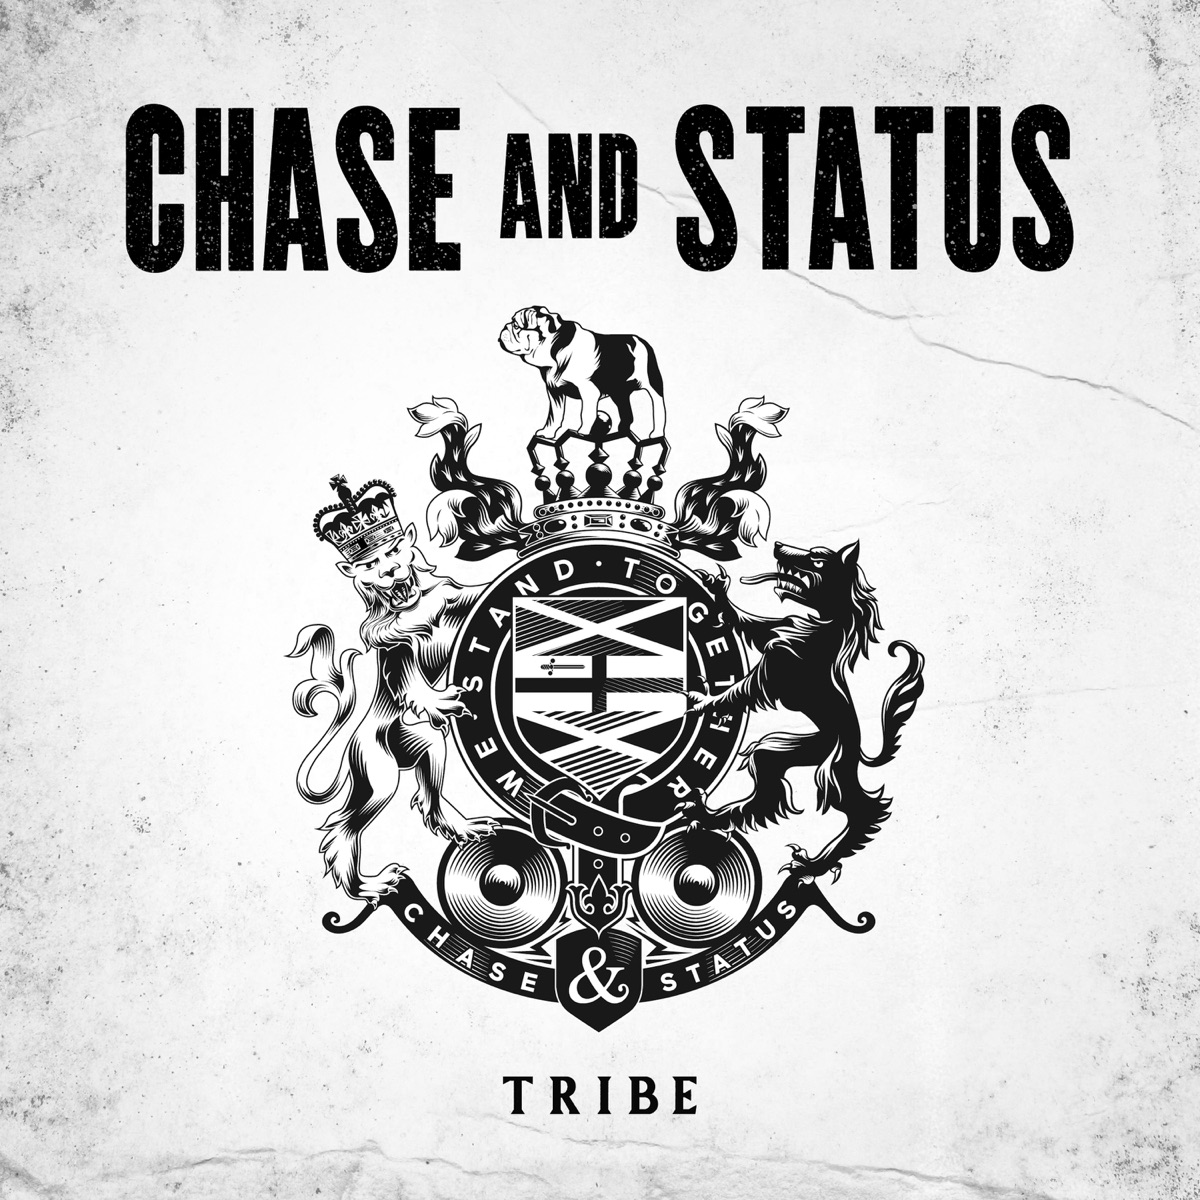 Tribe - Album by Chase & Status - Apple Music